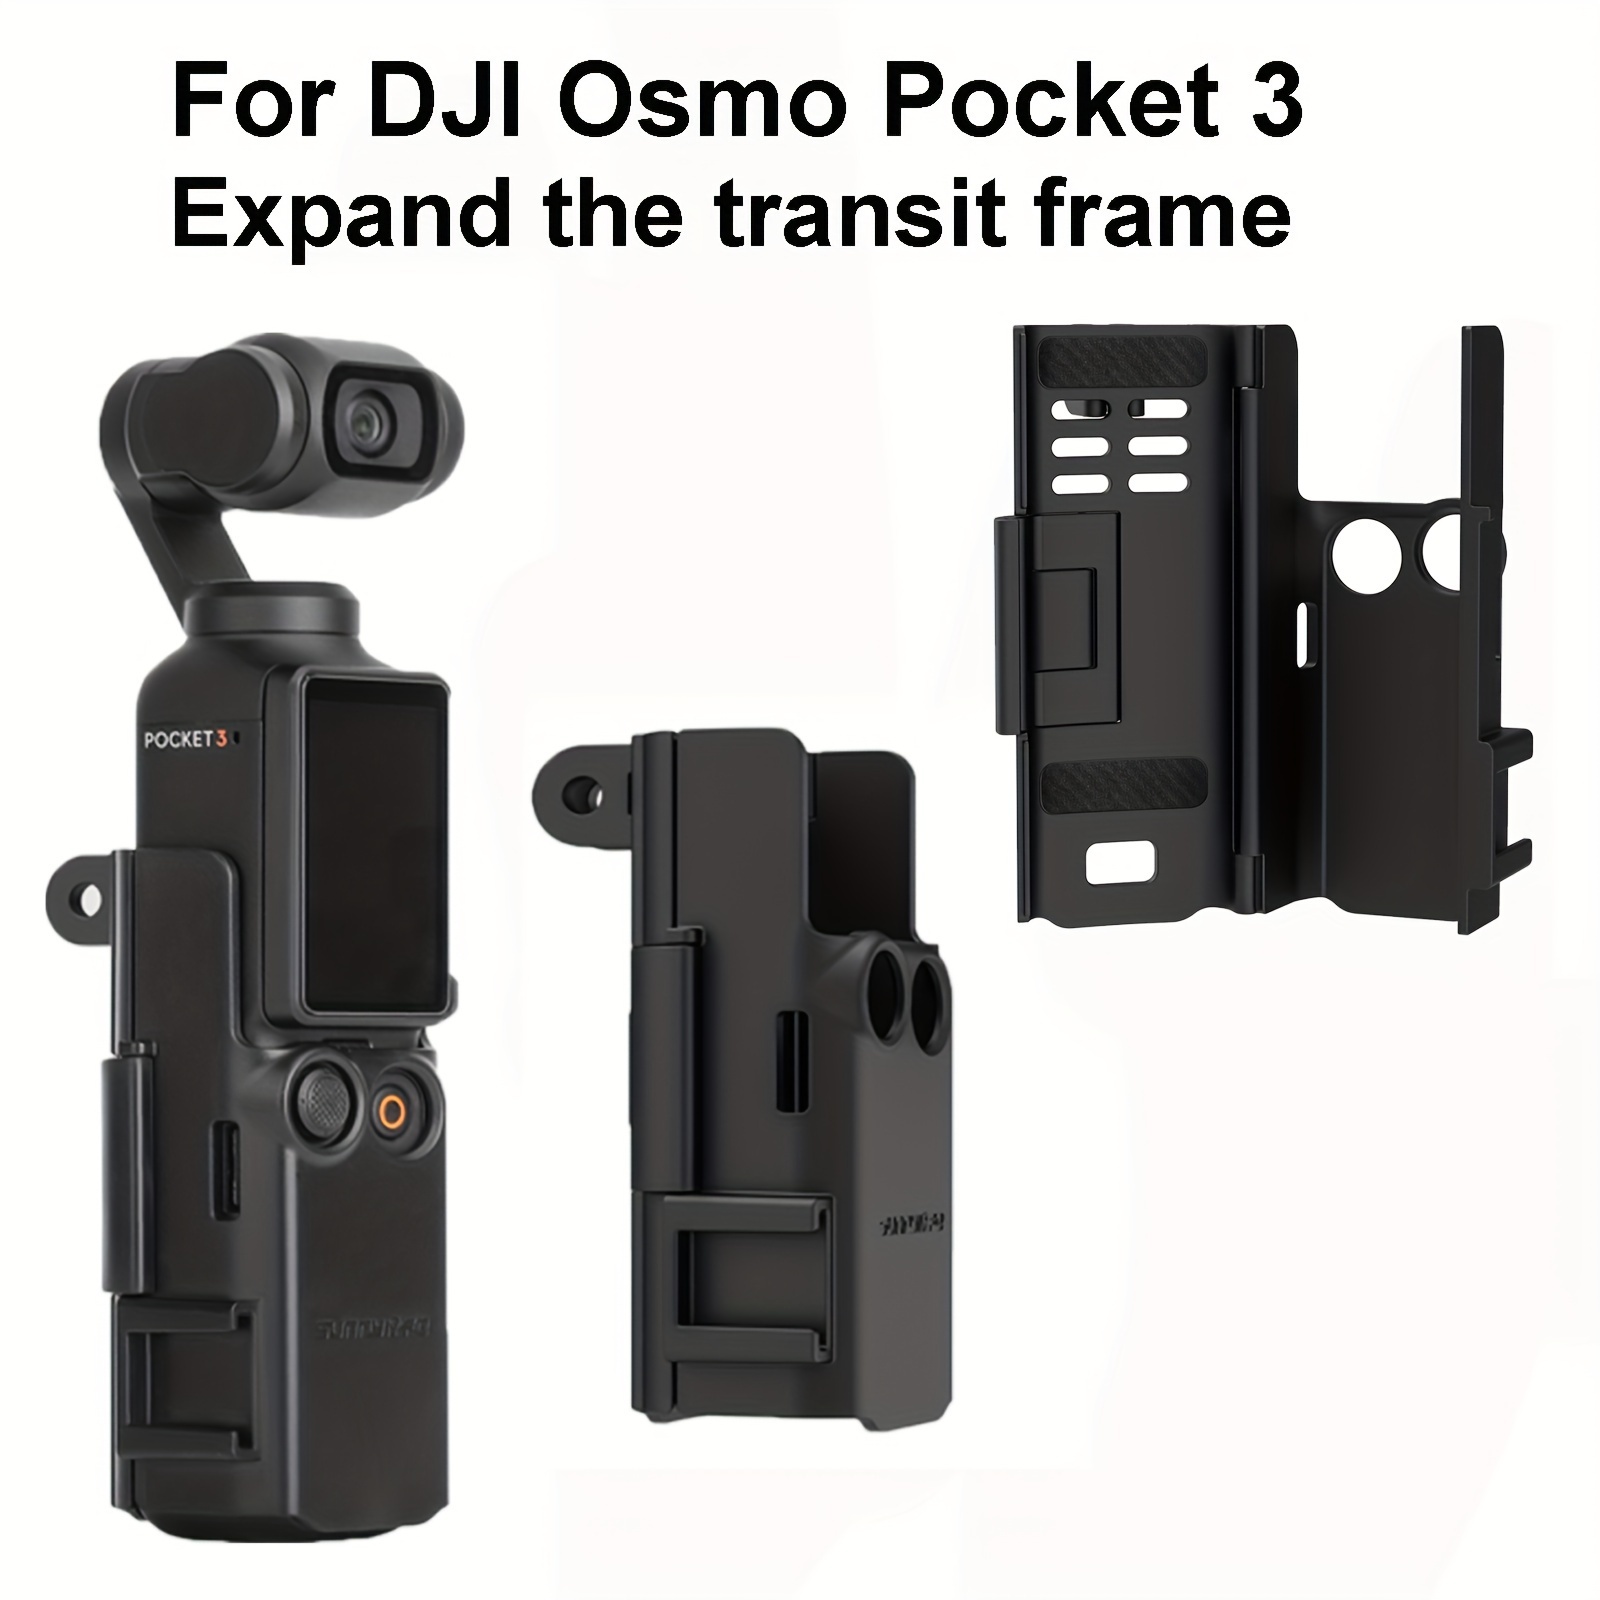 How Good is the DJI Osmo Pocket as an Action Cam? (Running) 